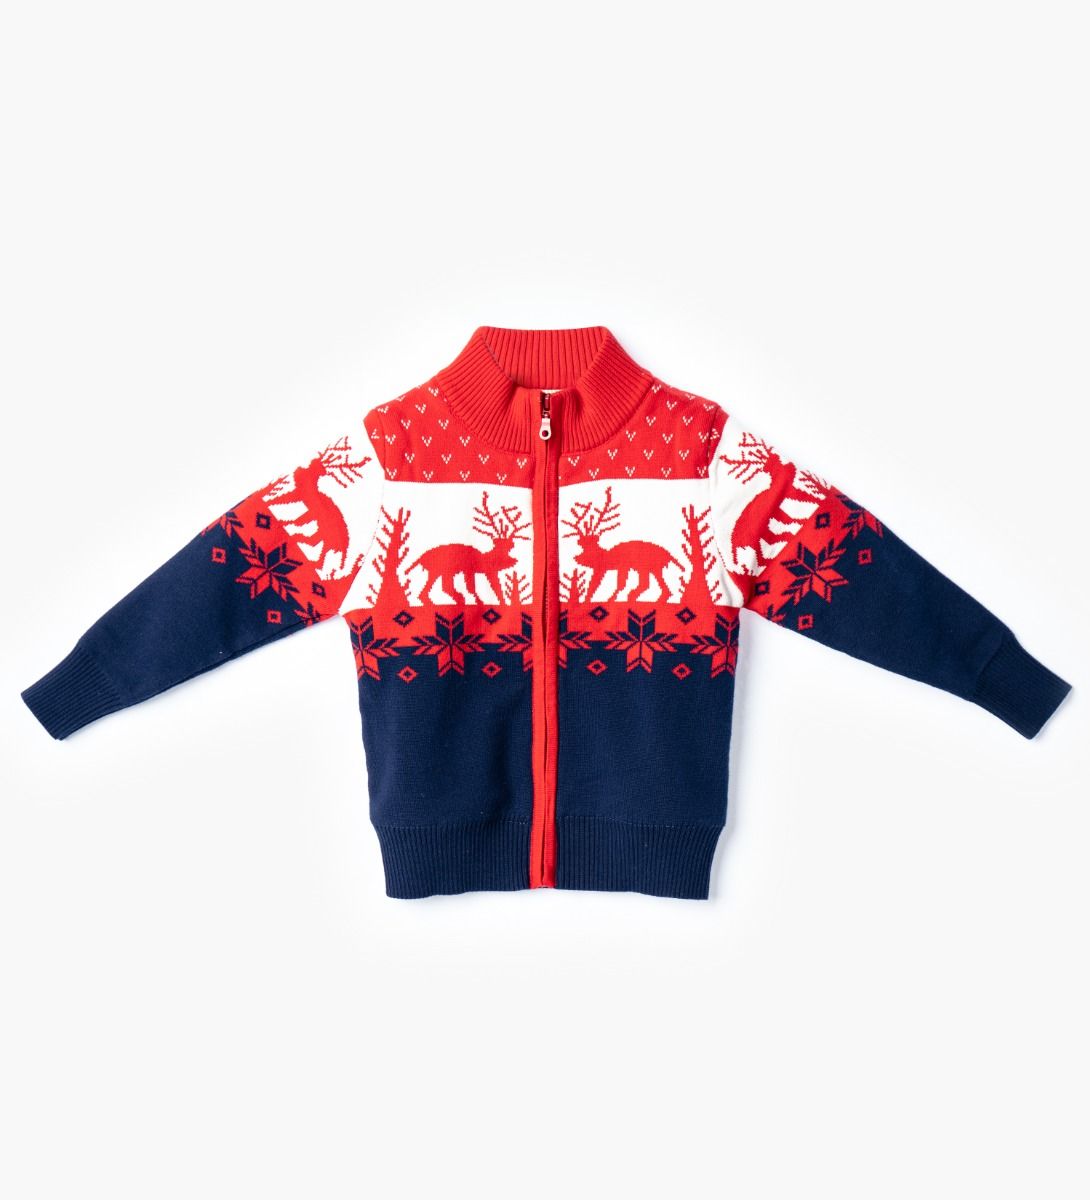 LEEZ Boys Multi-Color Zipper Cotton Sweater With Deer Patterns Red/ Navy